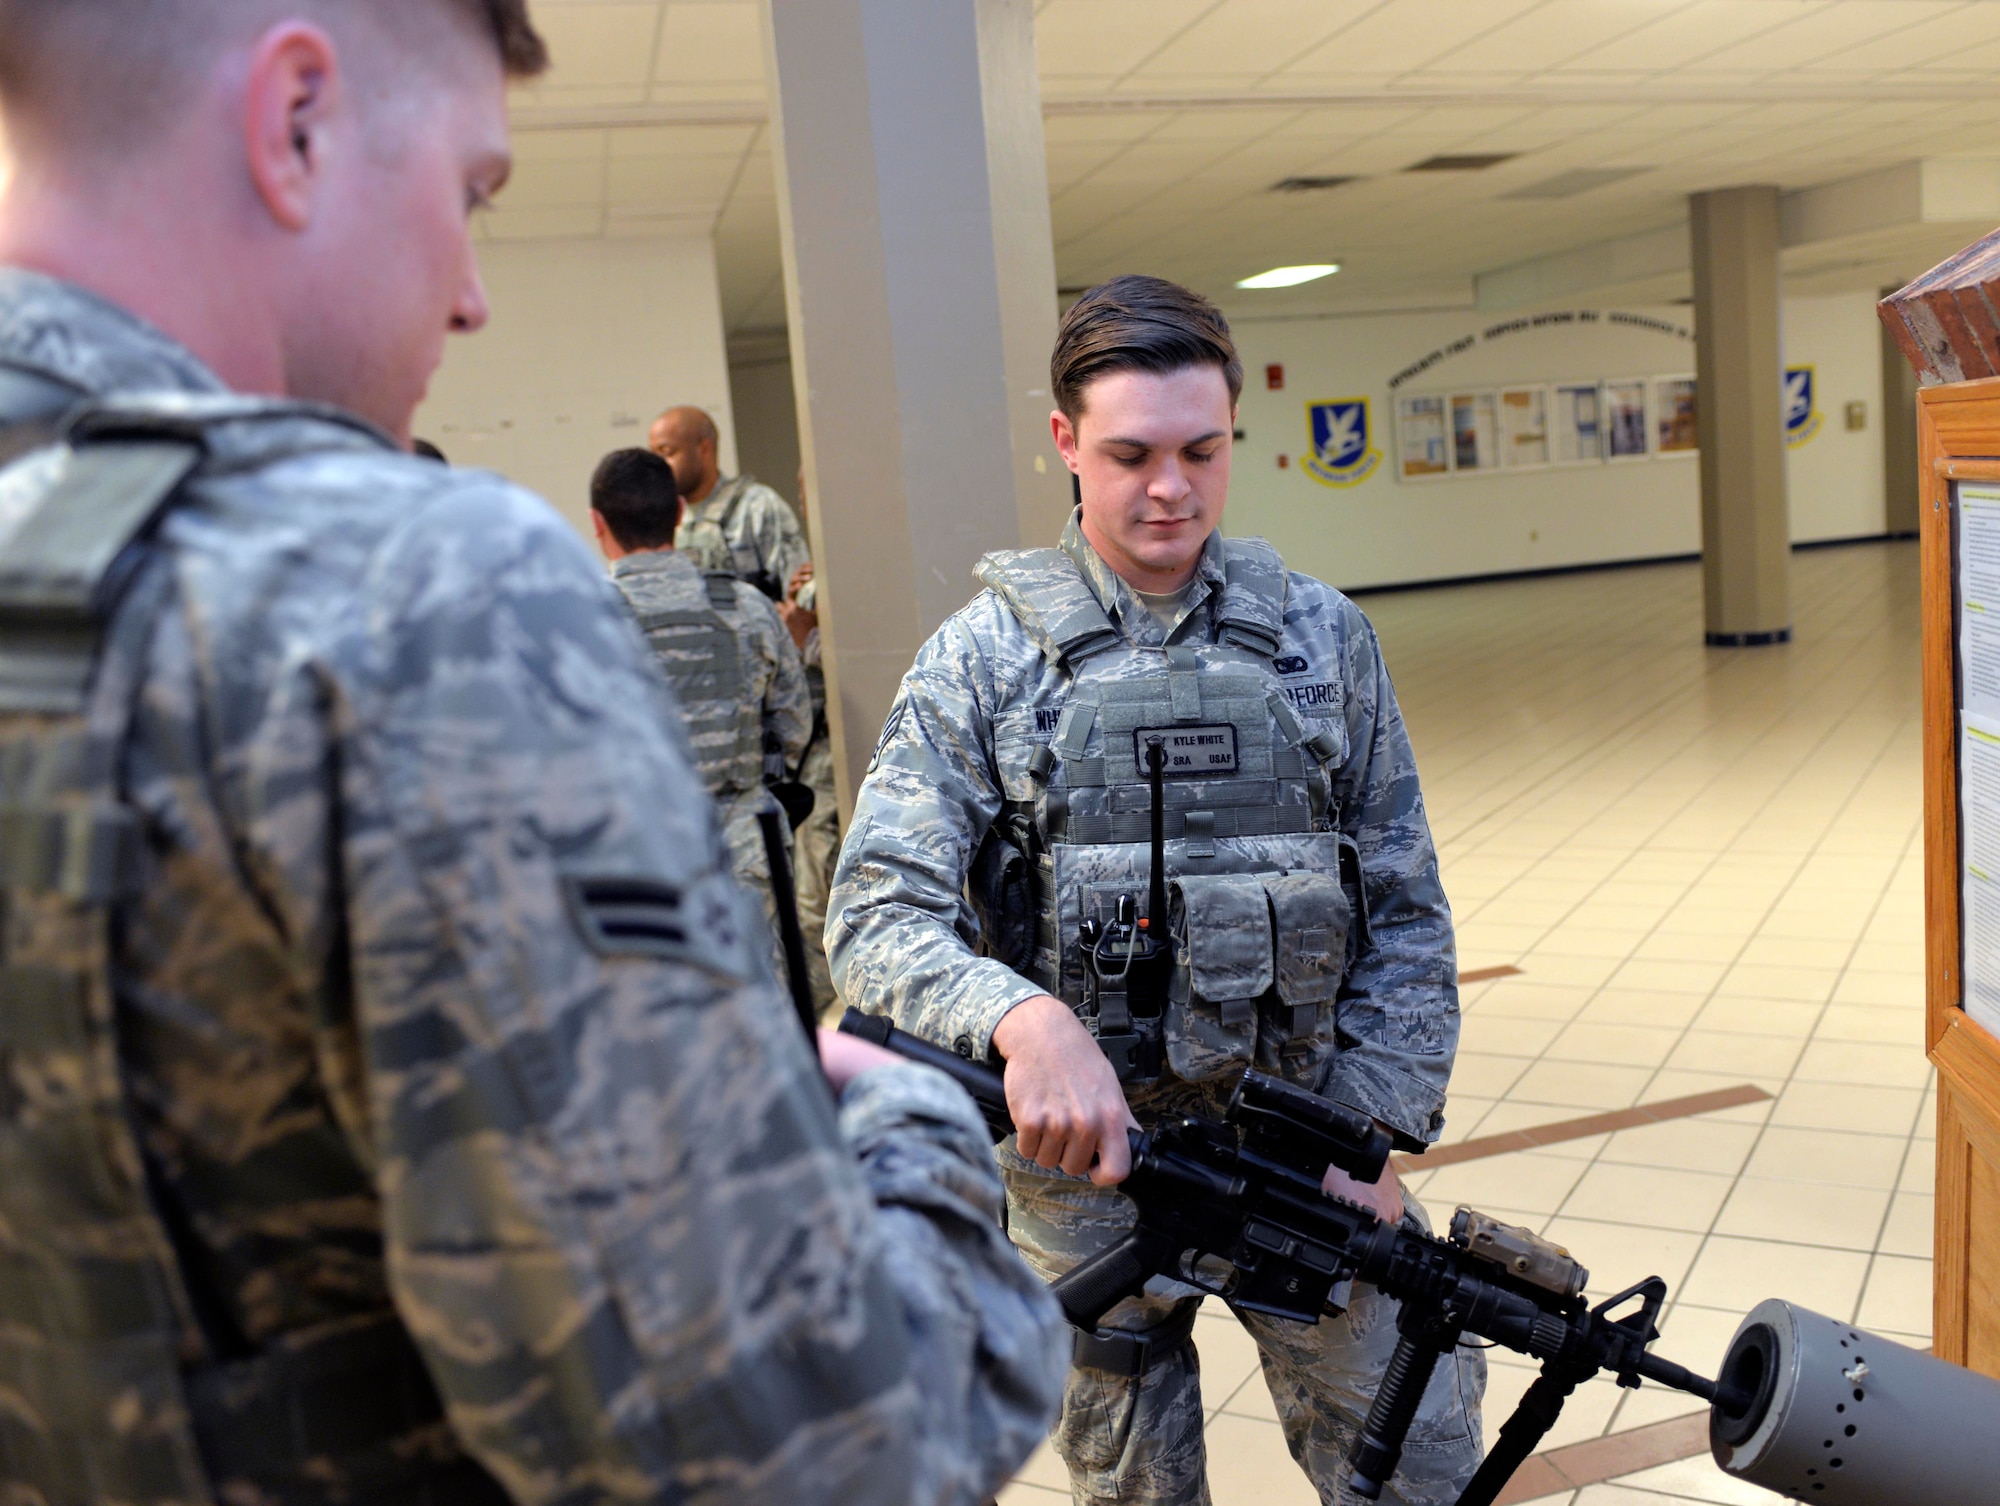 Senior Airman Kyle White, a response force member assigned to the 28th Security Forces Squadron, and Airman 1st Class Anthony Brown, a response force member assigned to the 28th SFS, clear an M4 carbine rifle at Ellsworth AFB, S.D., Oct. 25, 2016. In addition to housing government-owned firearms, the armory can store the firearms of Airman dormitory residents and visitors for safe keeping. (U.S. Air Force photo by Airman 1st Class Donald Knechtel)

